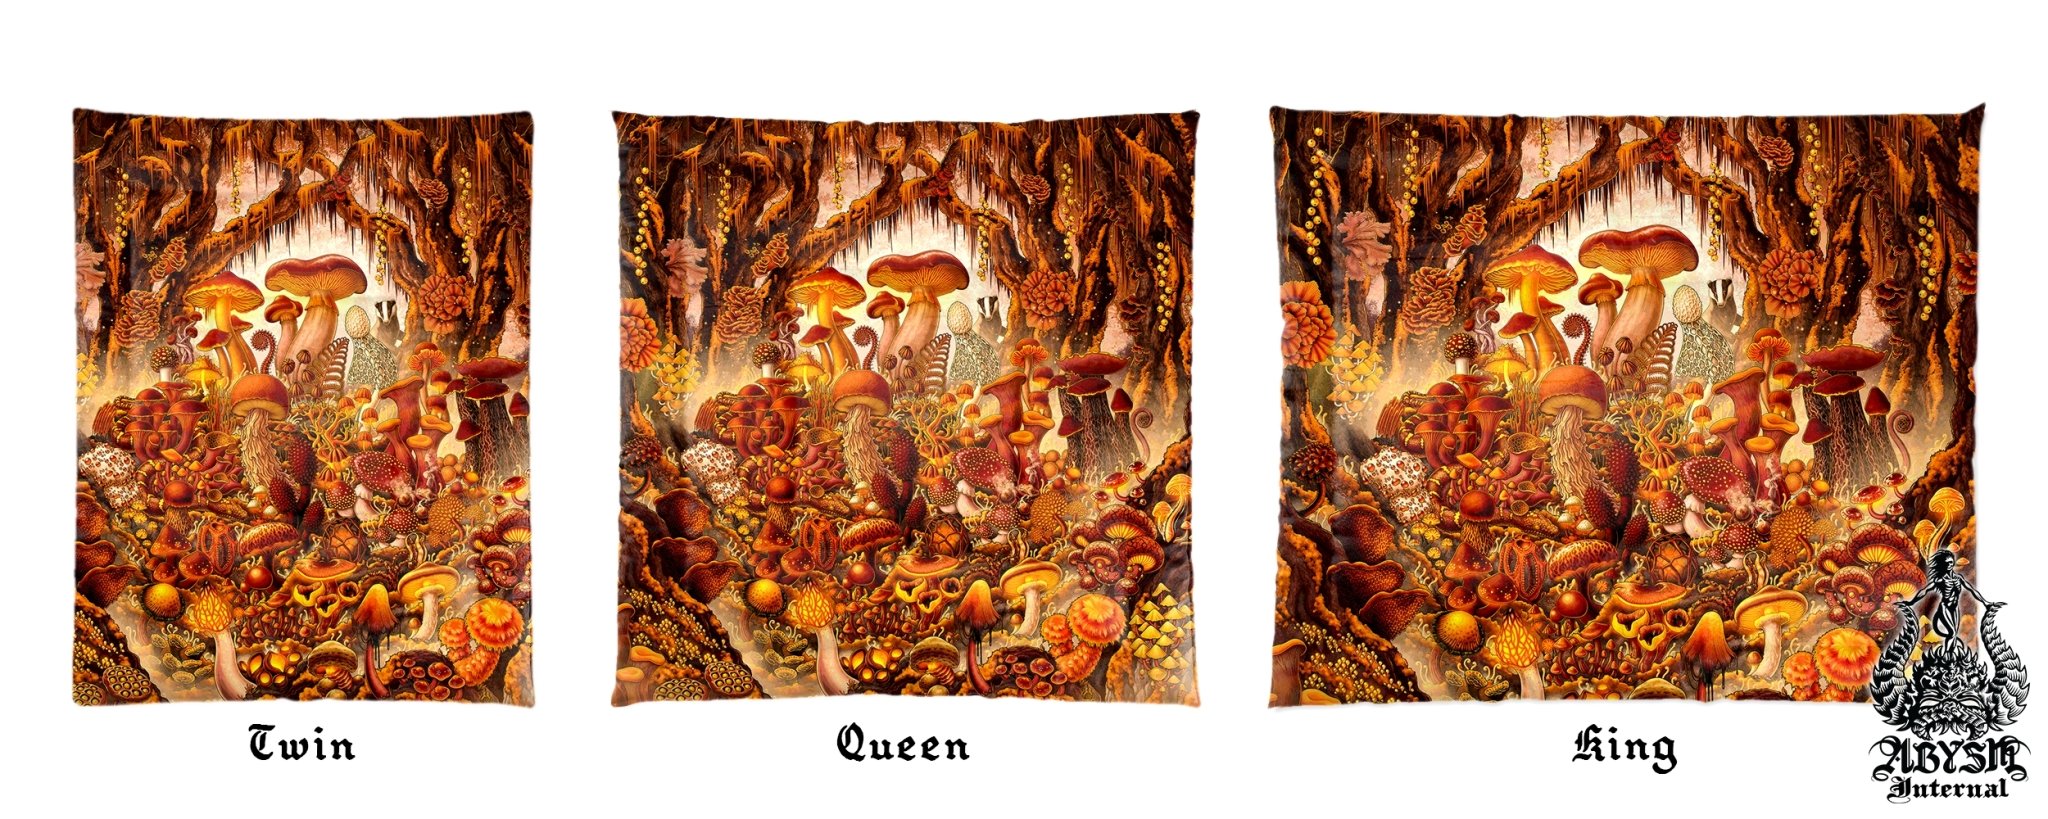 Mushrooms Bedding Set, Comforter and Duvet, Kids Fantasy Bed Cover, Psychedelic Bedroom Decor, King, Queen and Twin Size - Magic Shrooms, Steampunk - Abysm Internal